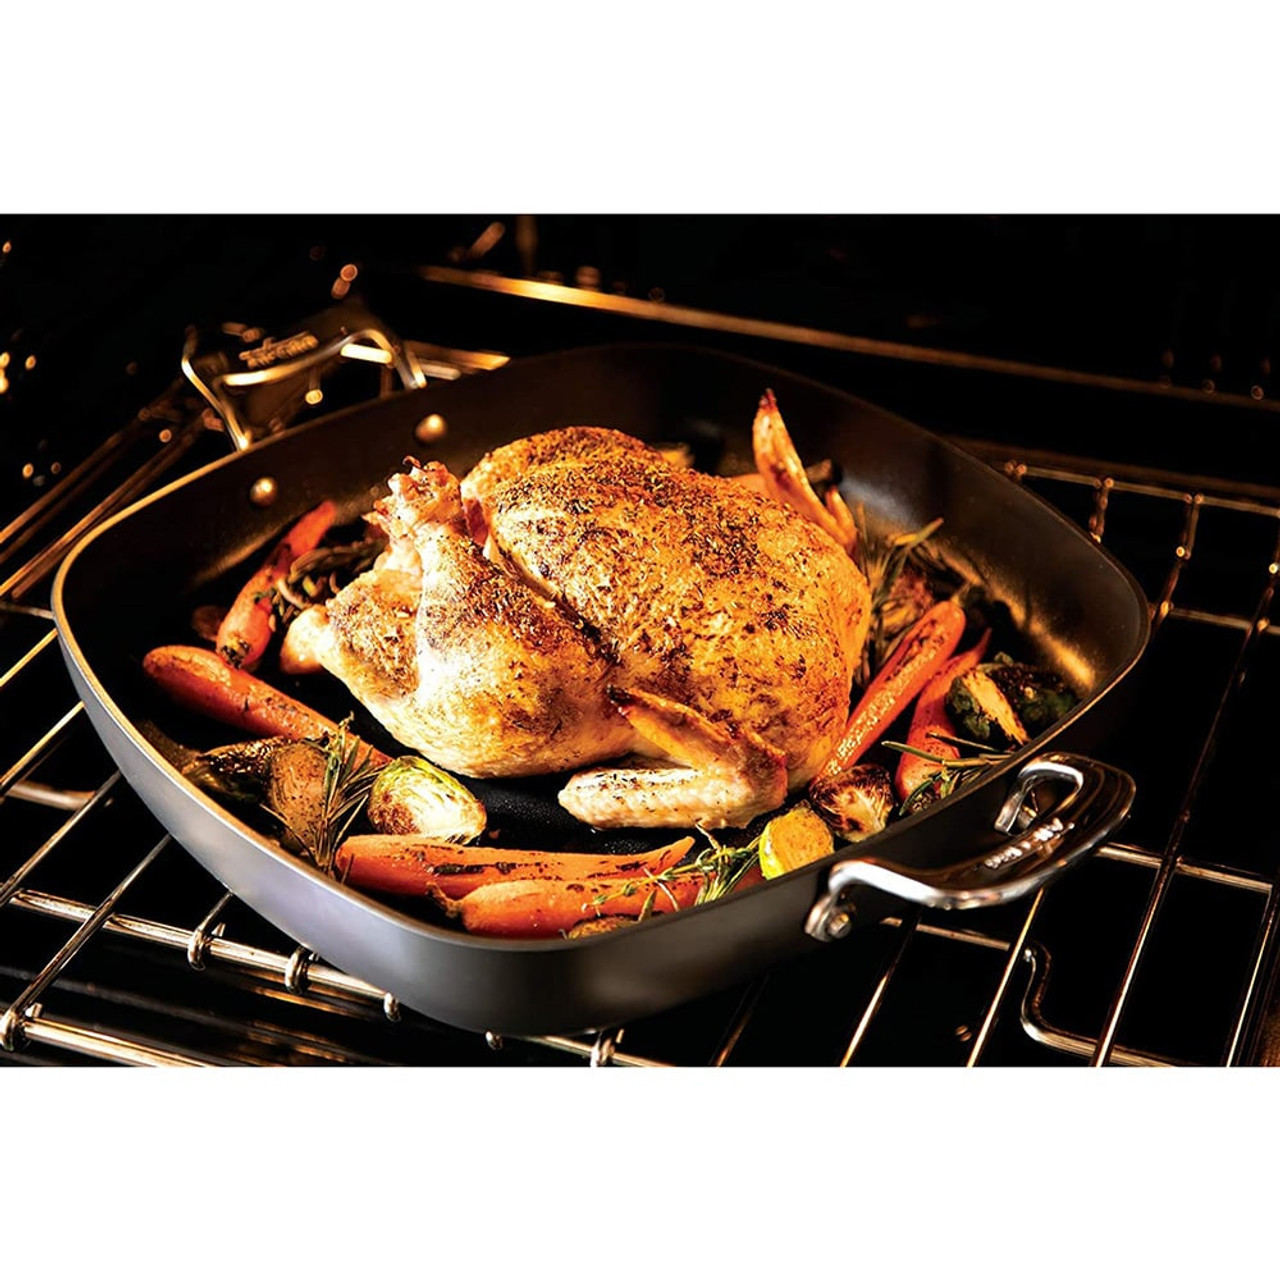 Essentials Nonstick Cookware, Simmer & Stew Square Pan with lid and trivet,  5 quart